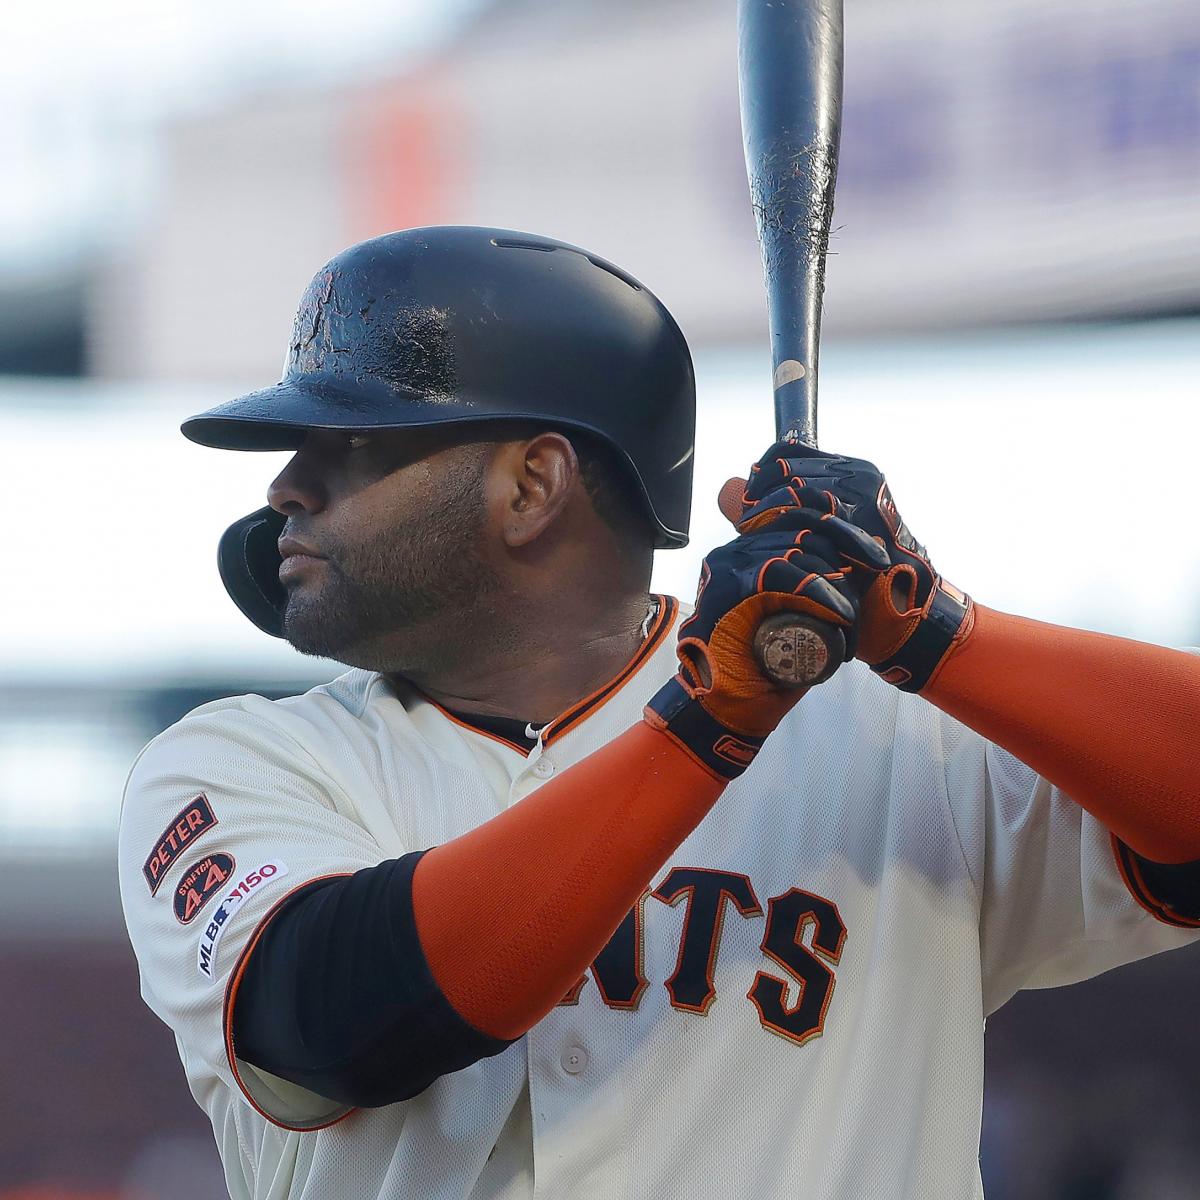 Braves sign veteran Pablo Sandoval to a minor league deal